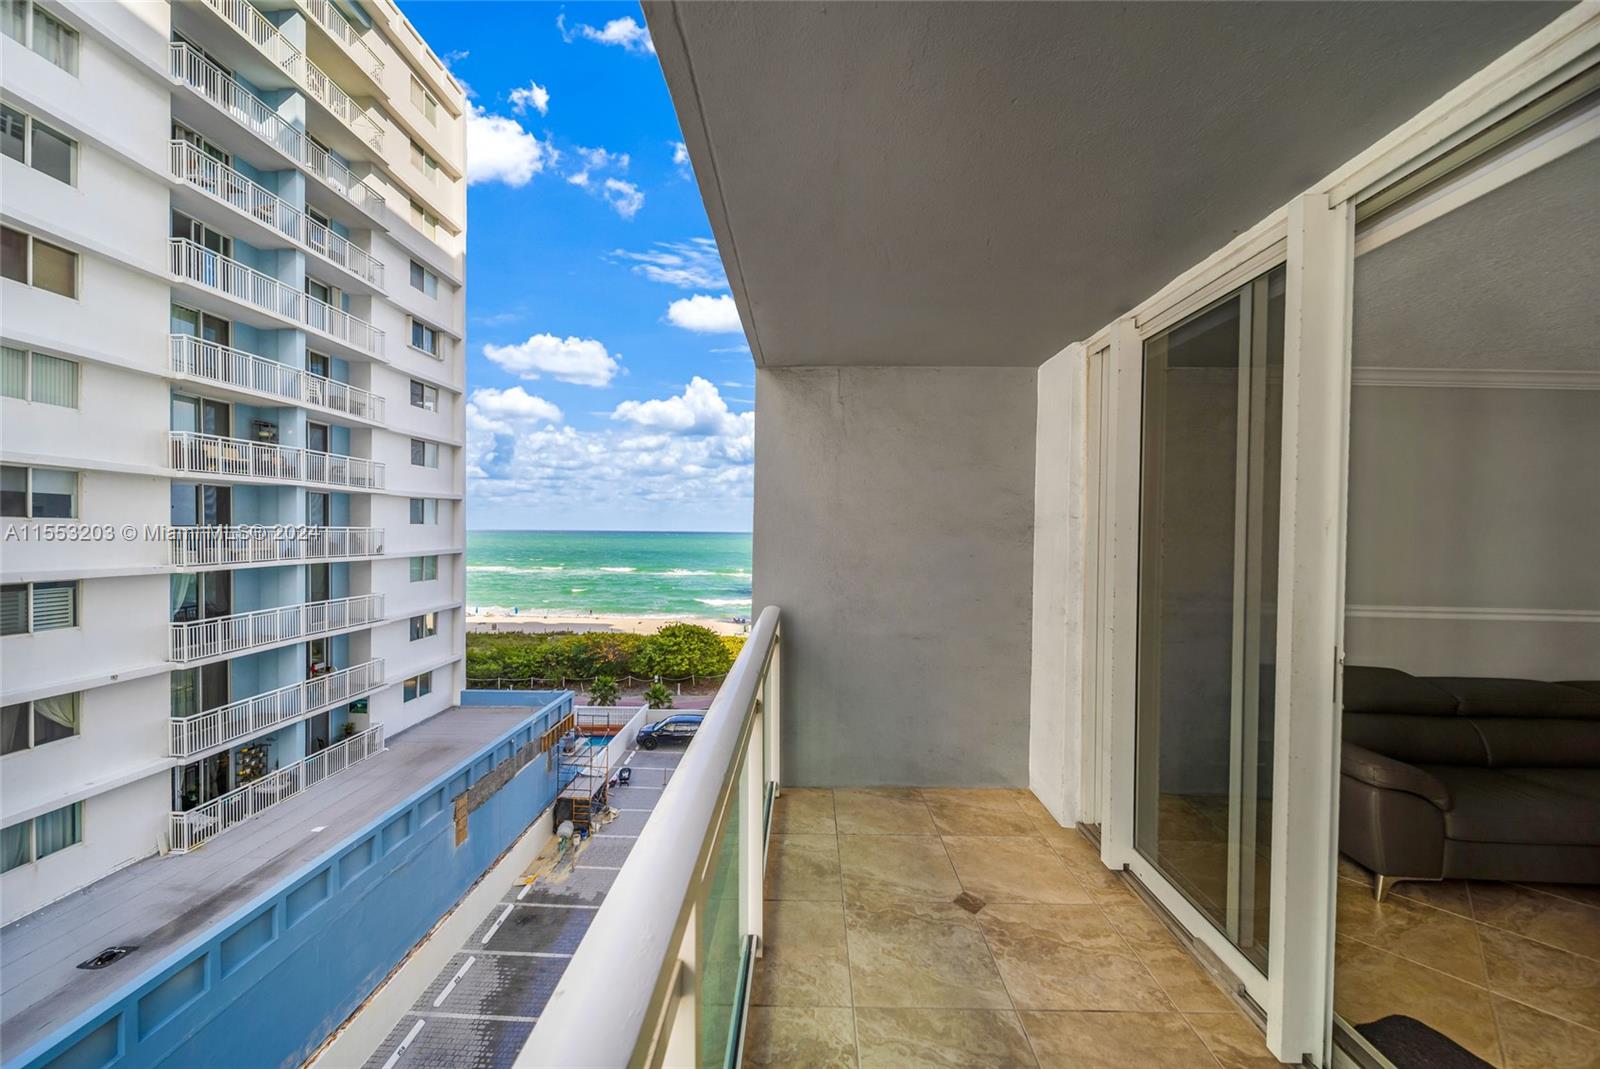 6917  Collins Ave #708 For Sale A11553203, FL